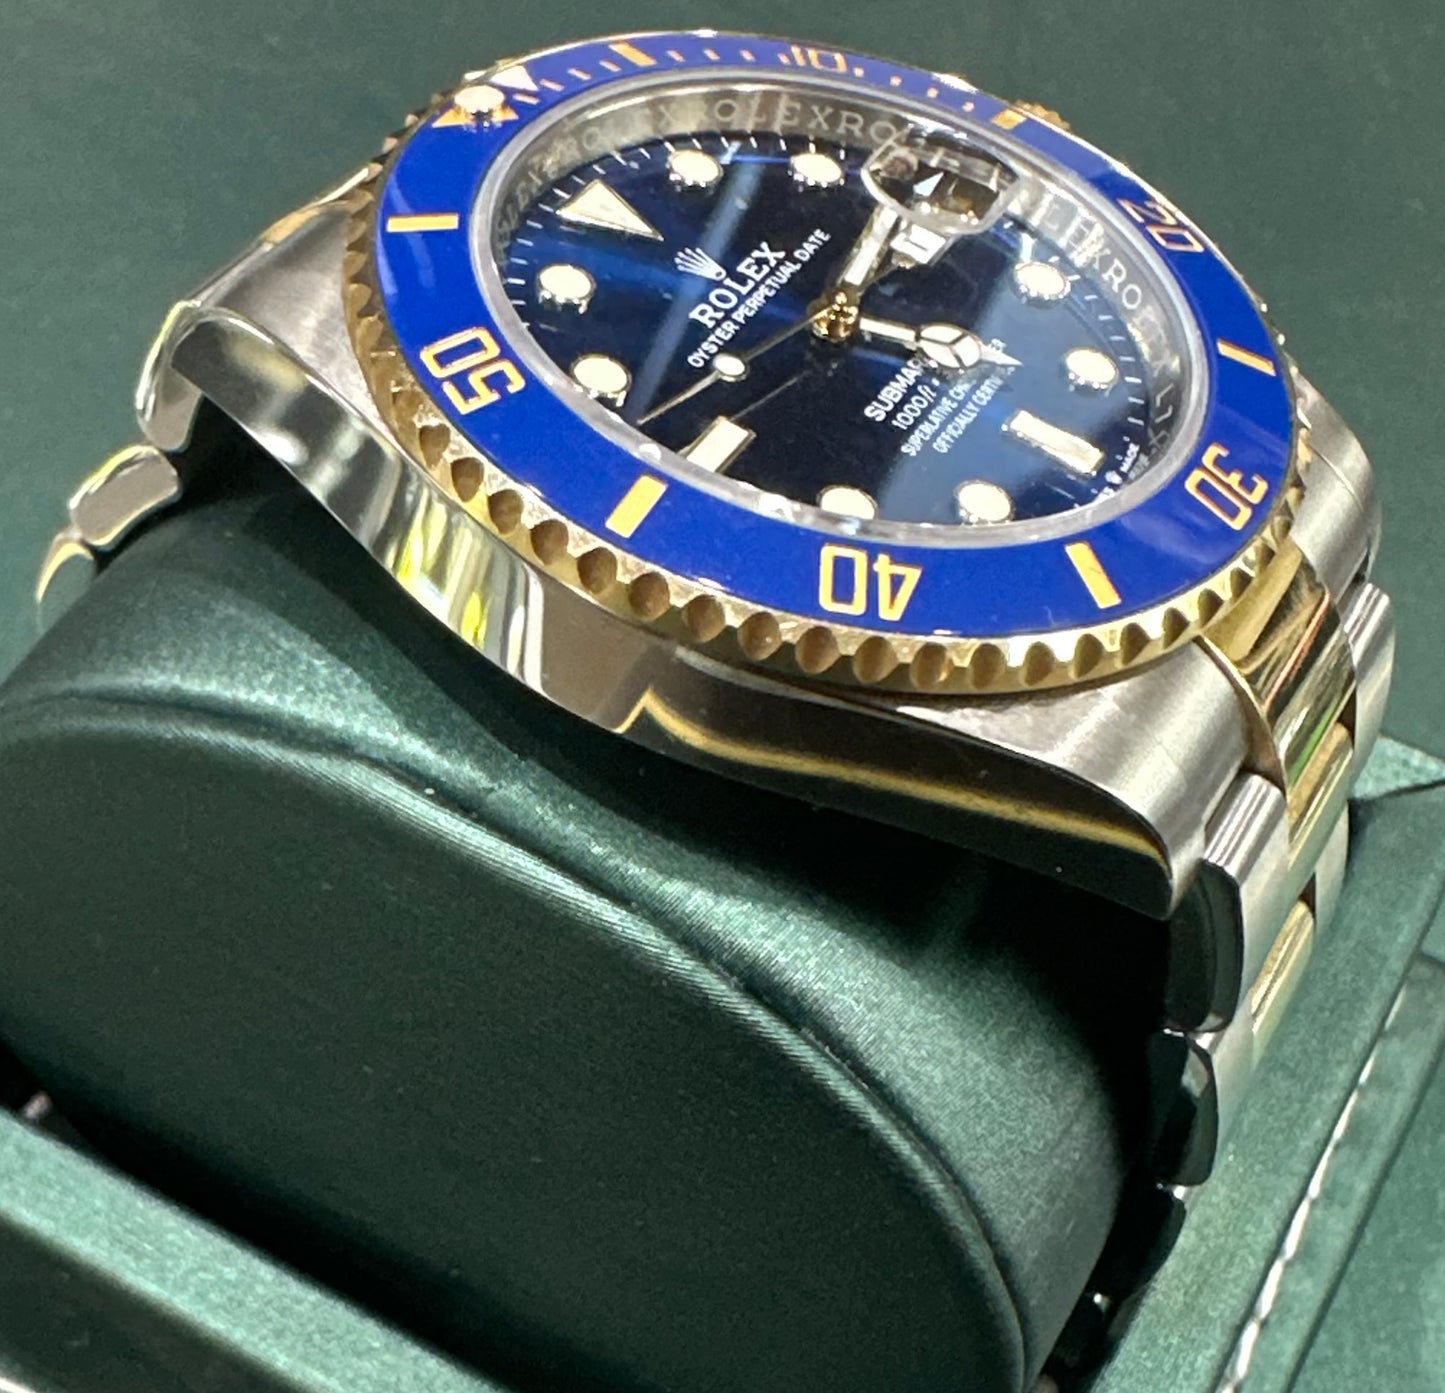 Rolex Submariner two tone blue dial 126618LB